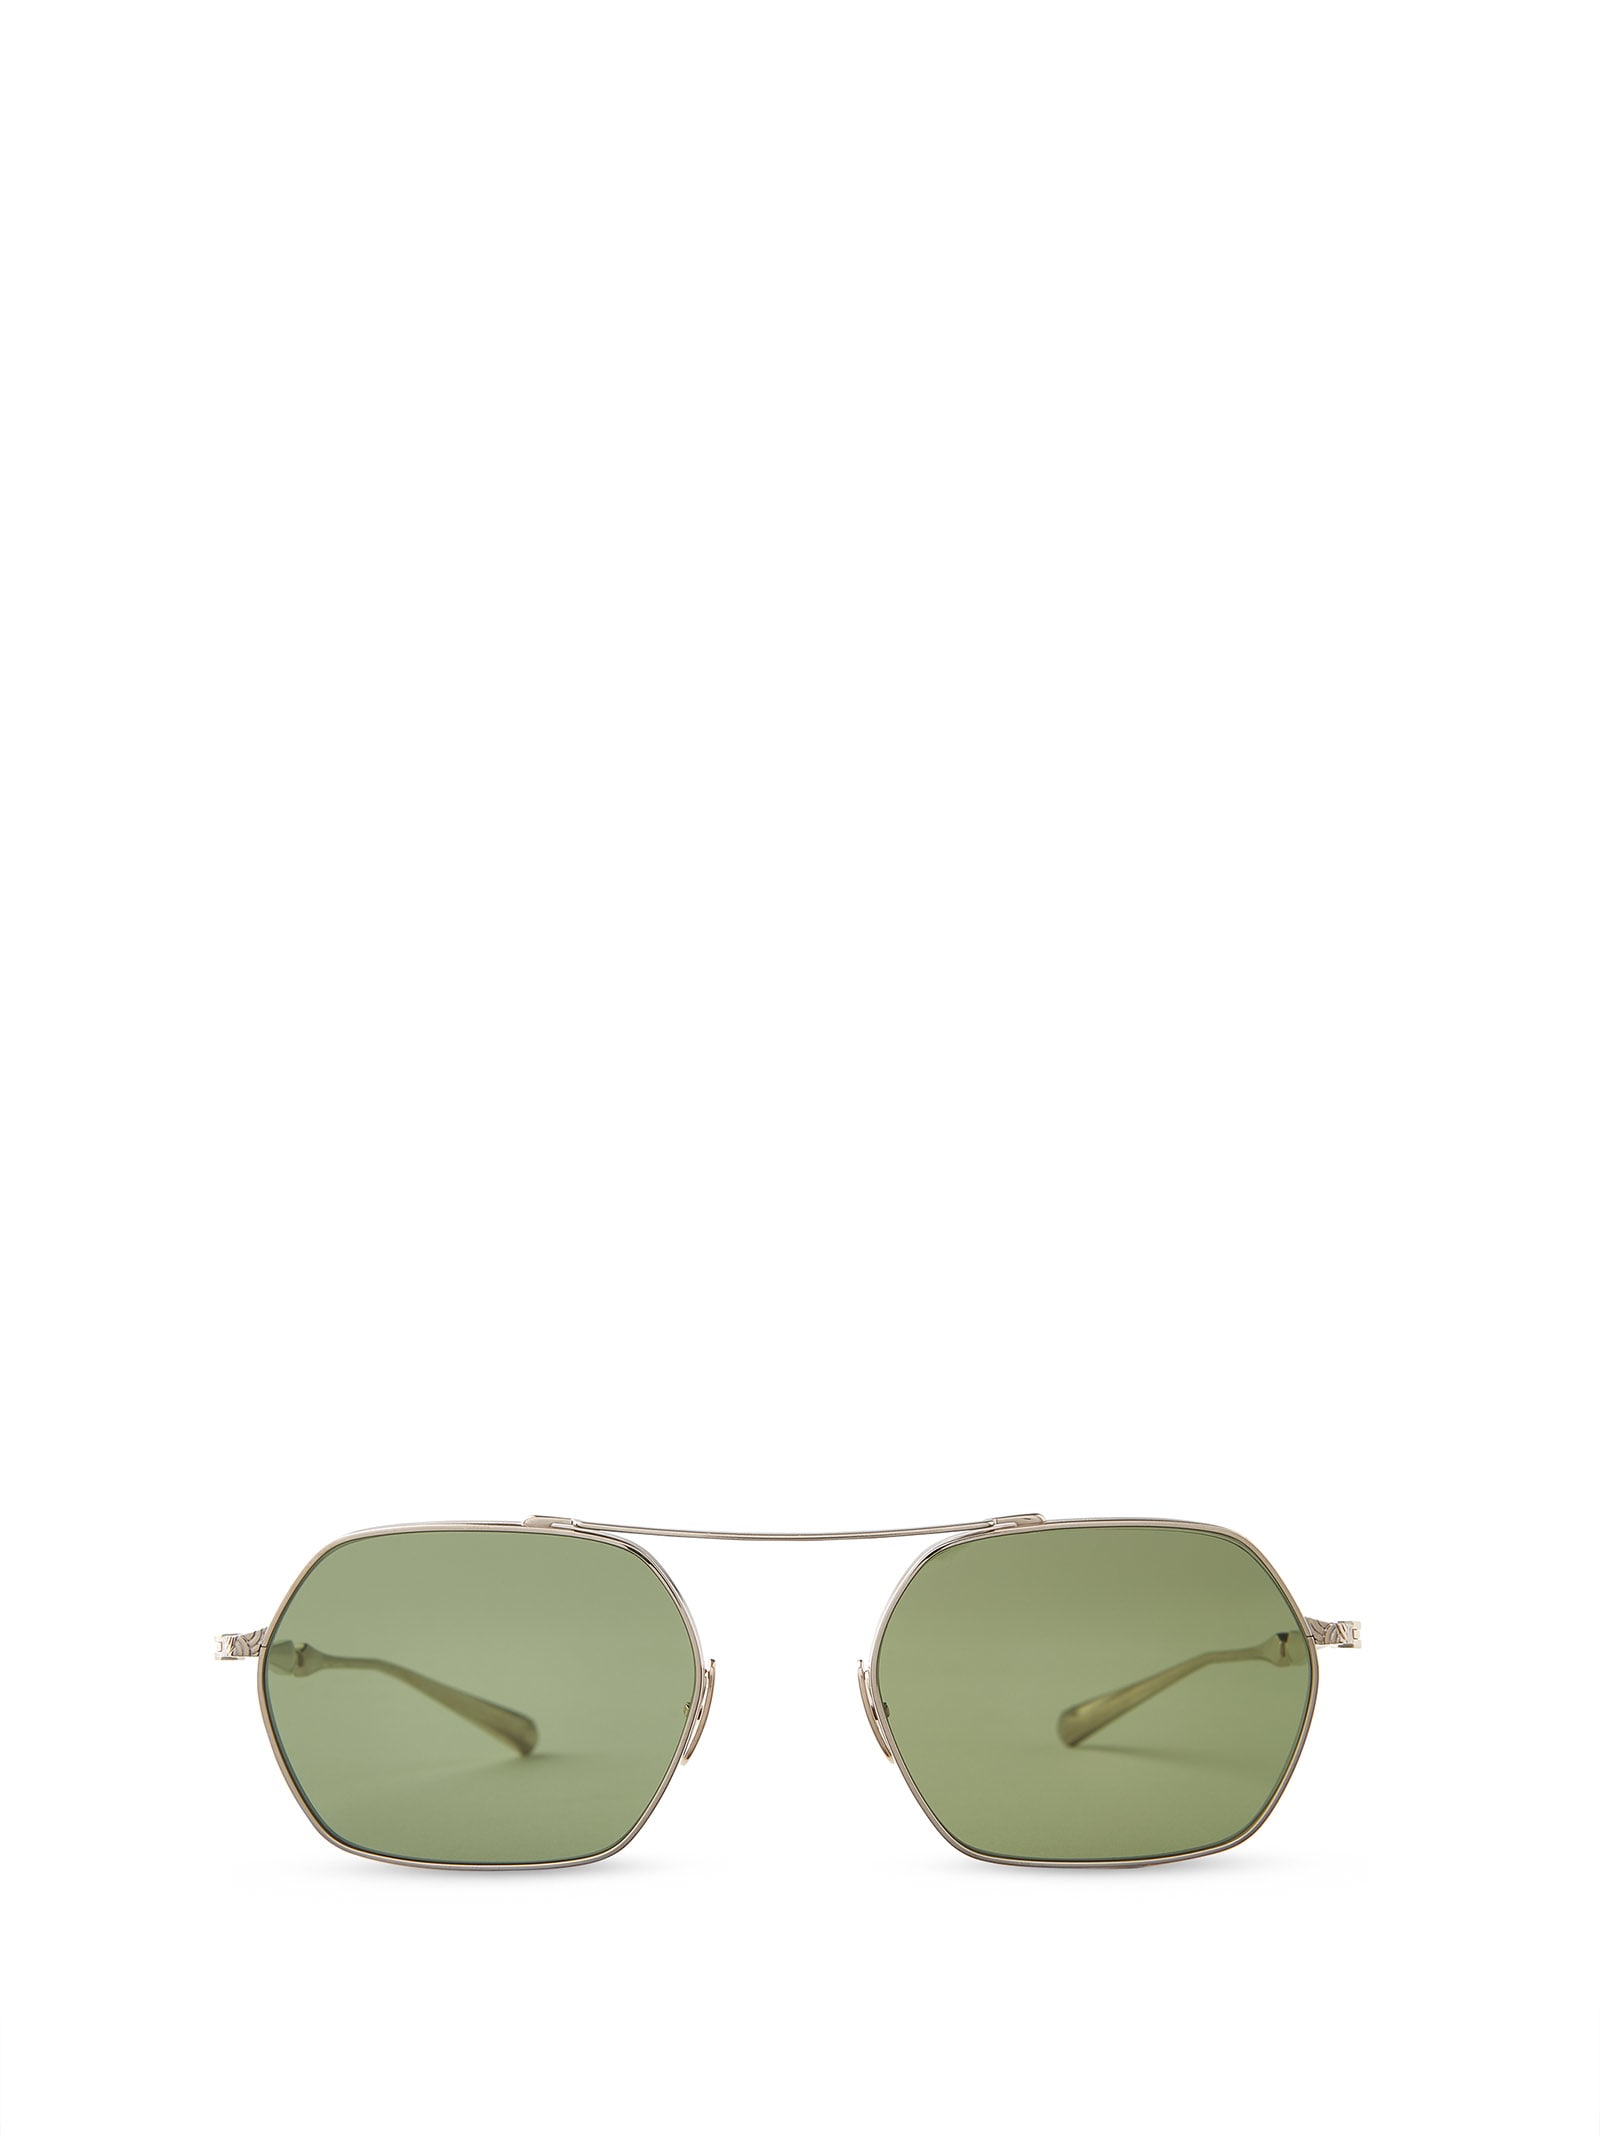 Mr Leight Ryder S Grey Gold Sunglasses